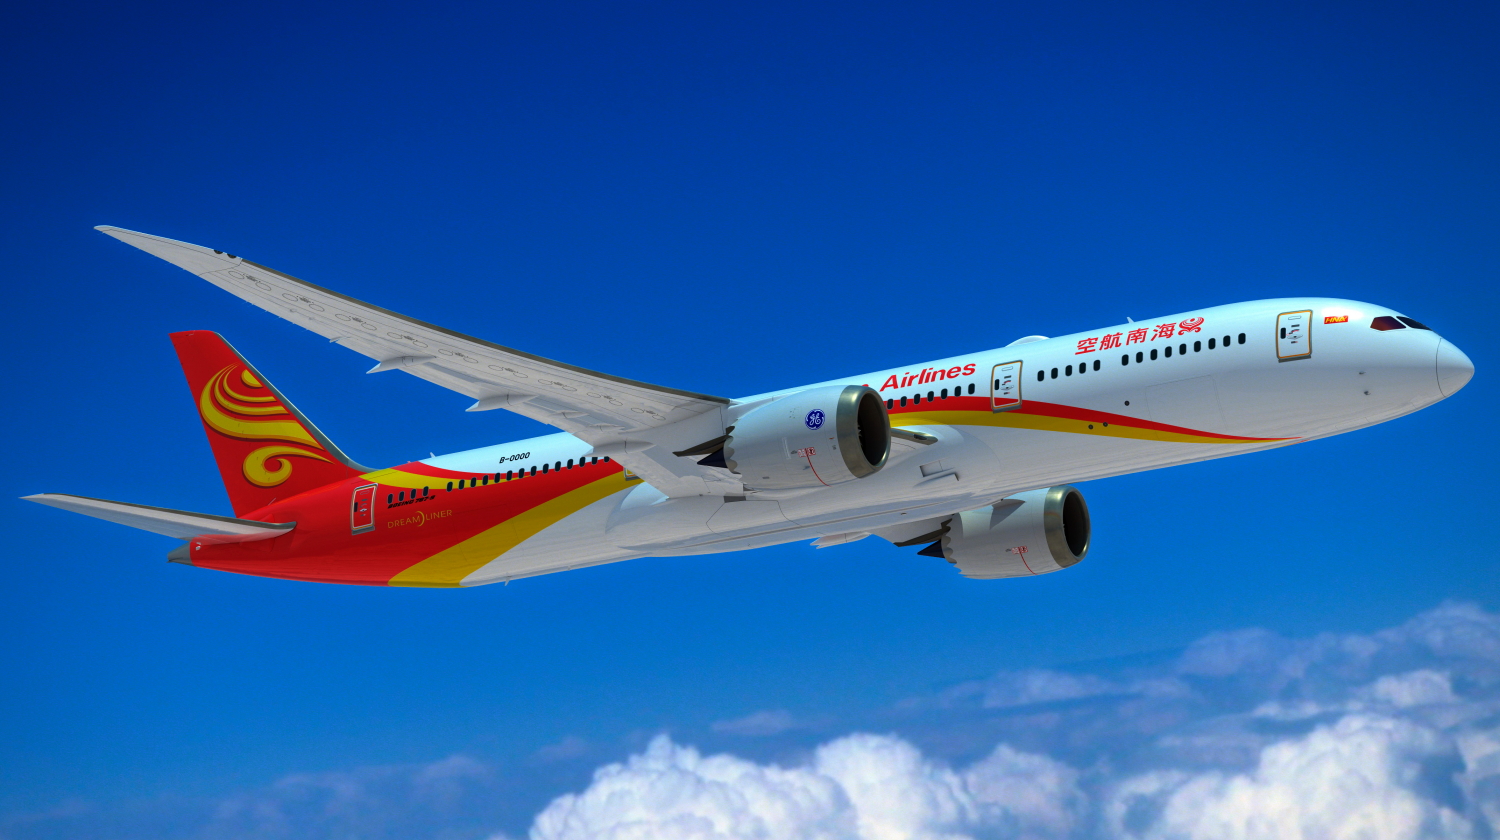 Hainan Airlines Boeing 787-9. Click to enlarge.